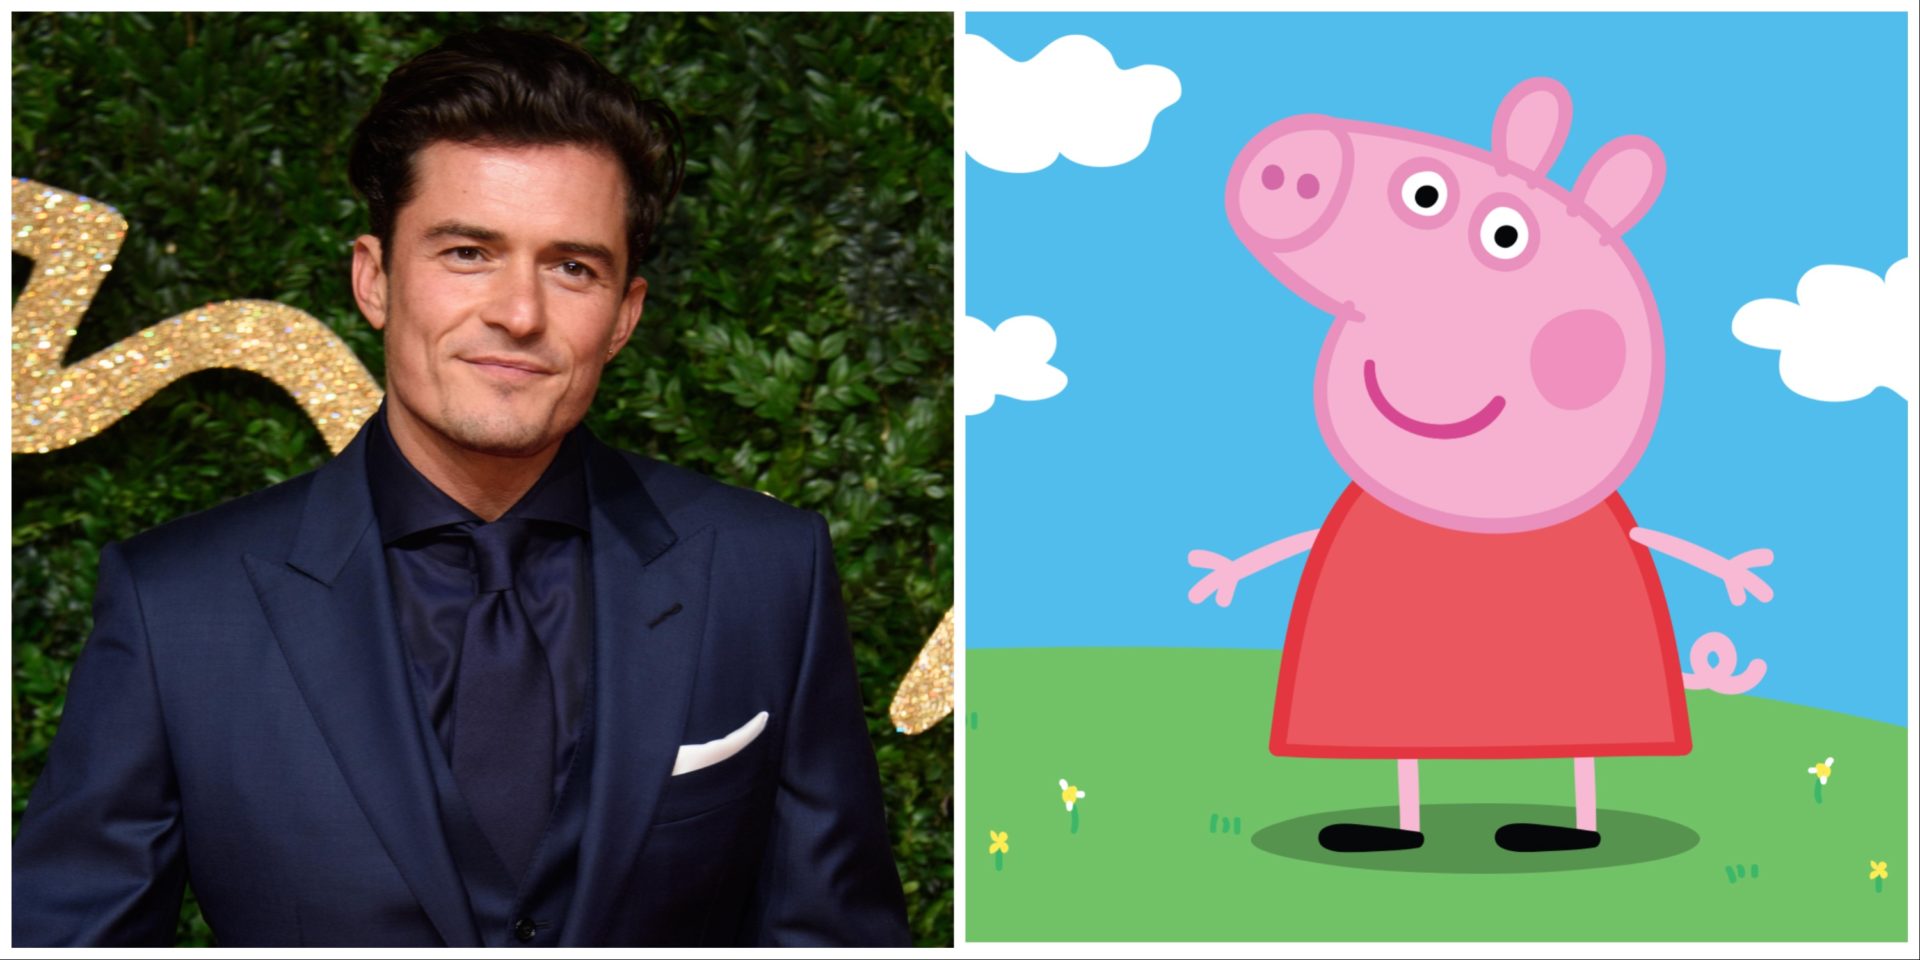 Katy Perry Joins 'Peppa Pig' Voice Cast Guest Role